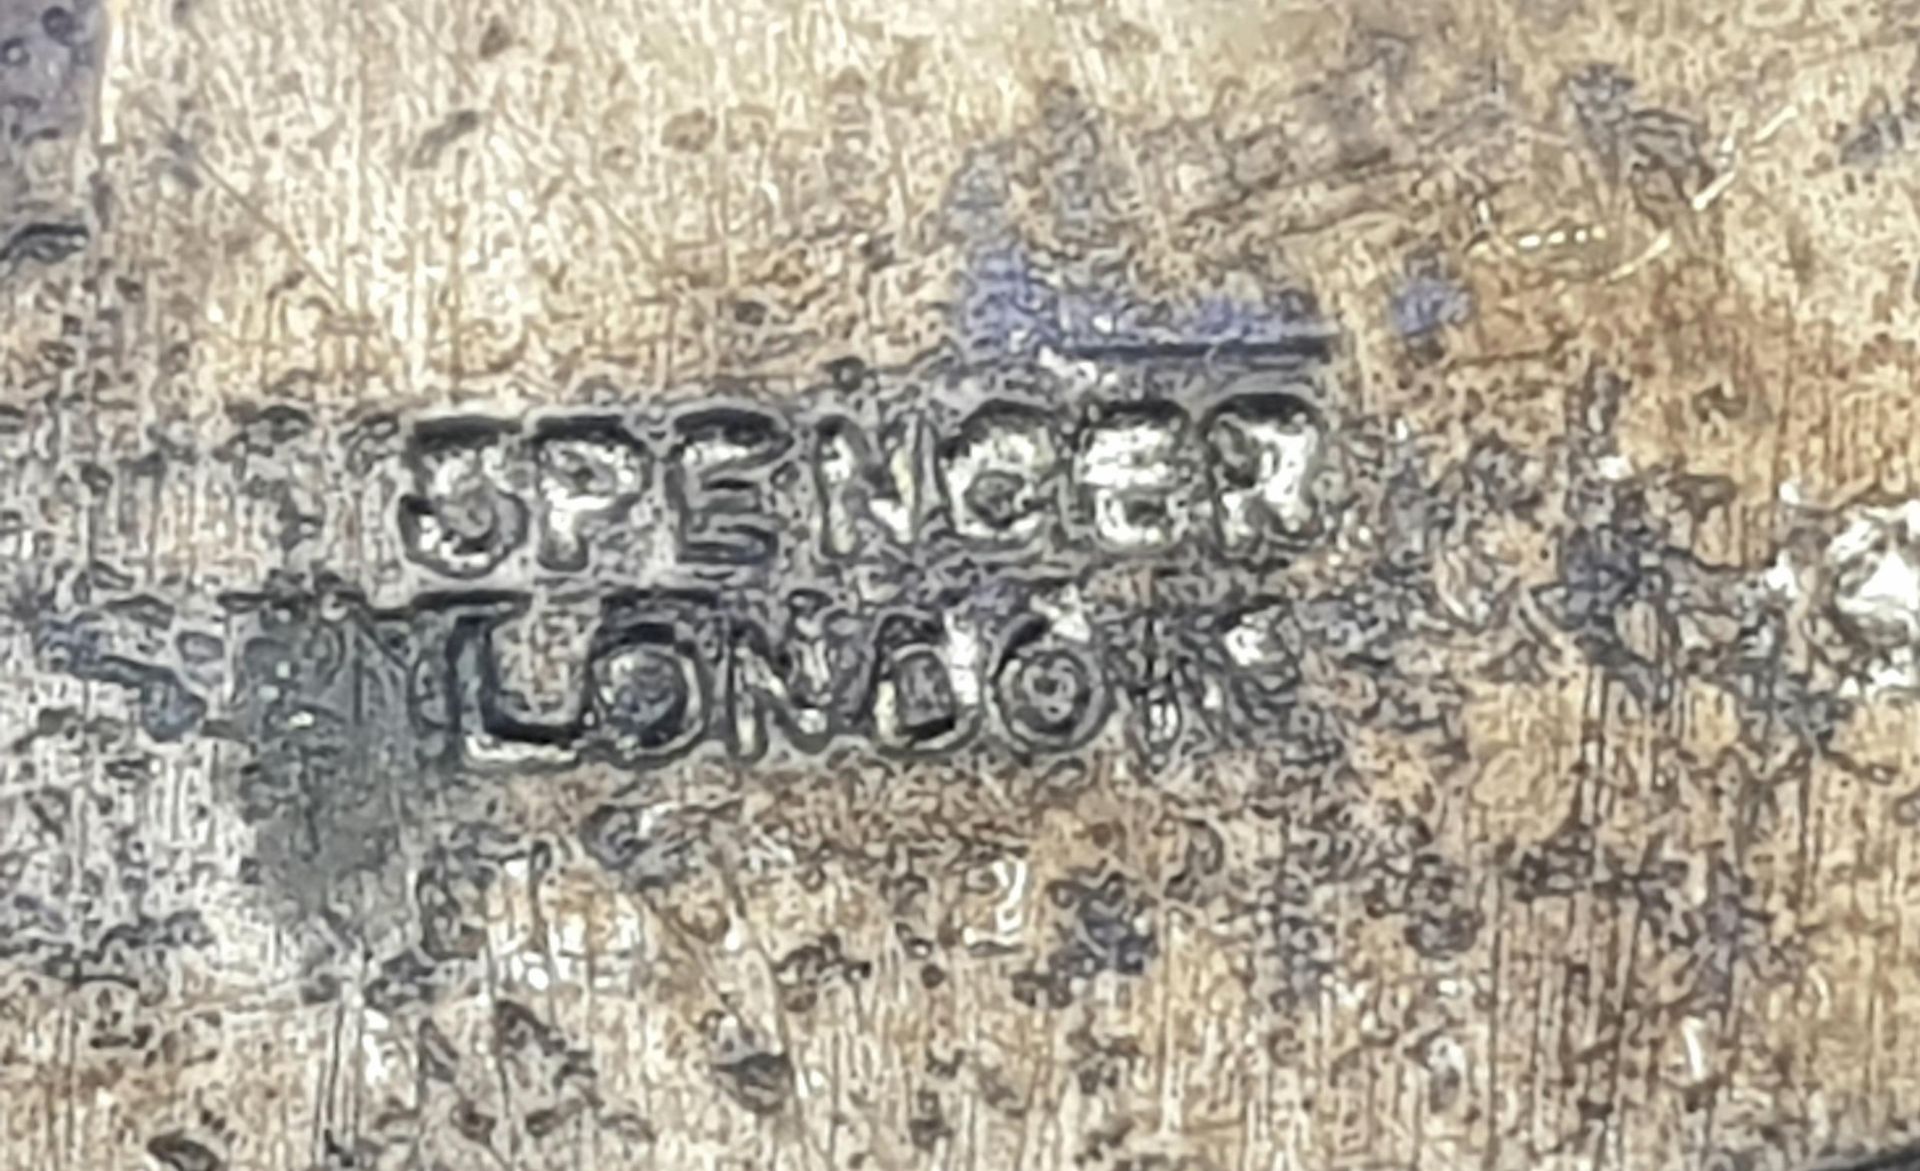 WW2 Silver Polish Pilots Lapel Badge. Made in London, England by Spencer’s. - Image 3 of 4